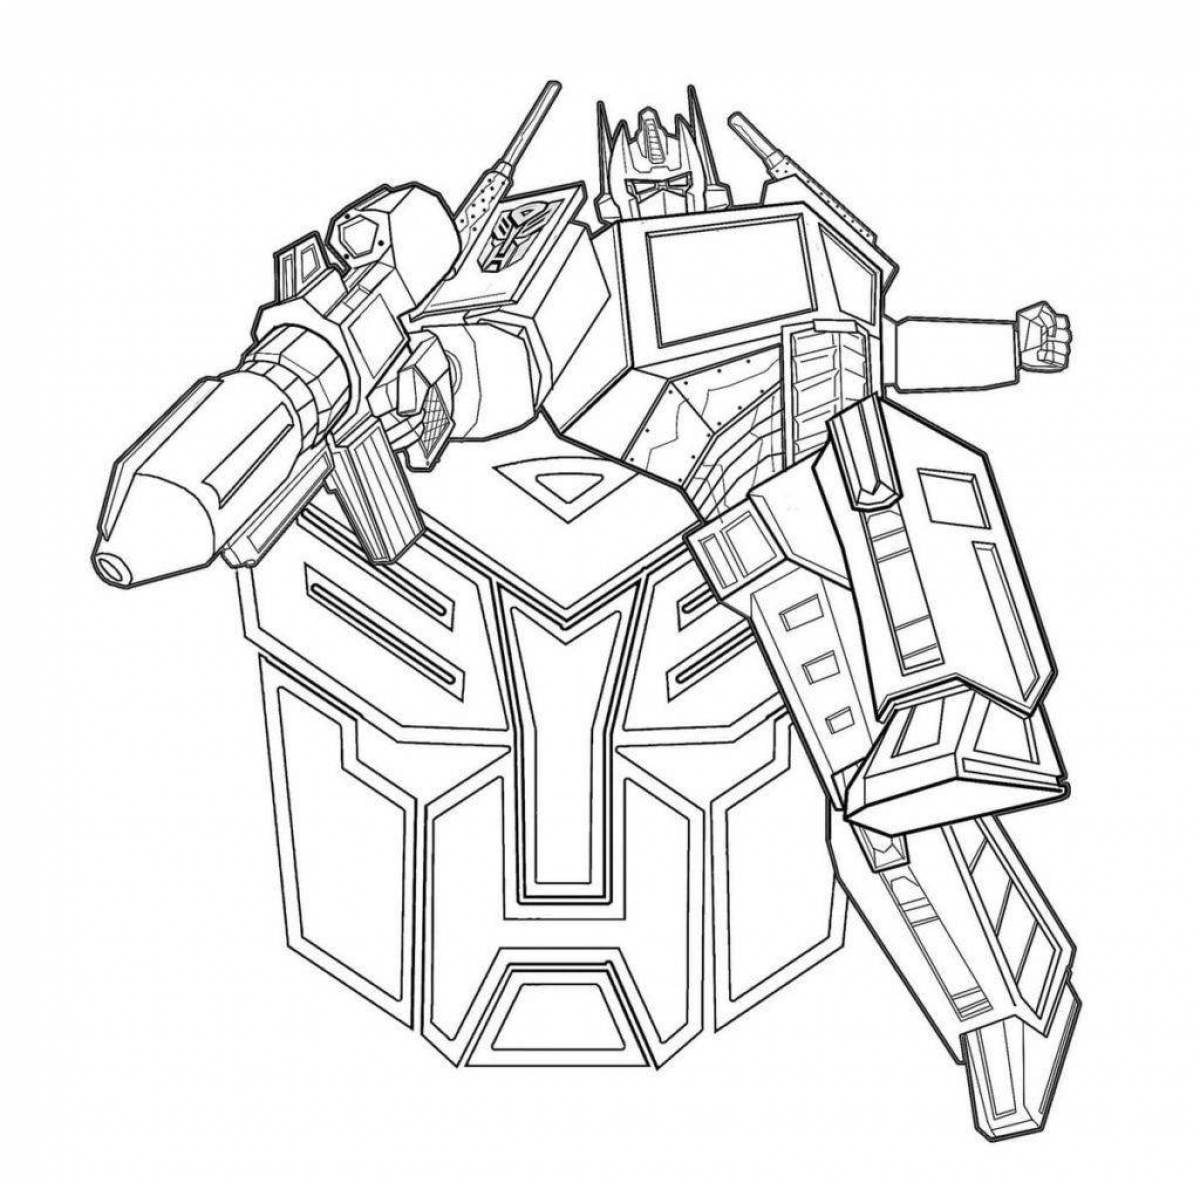 Fun transformers coloring pages for boys